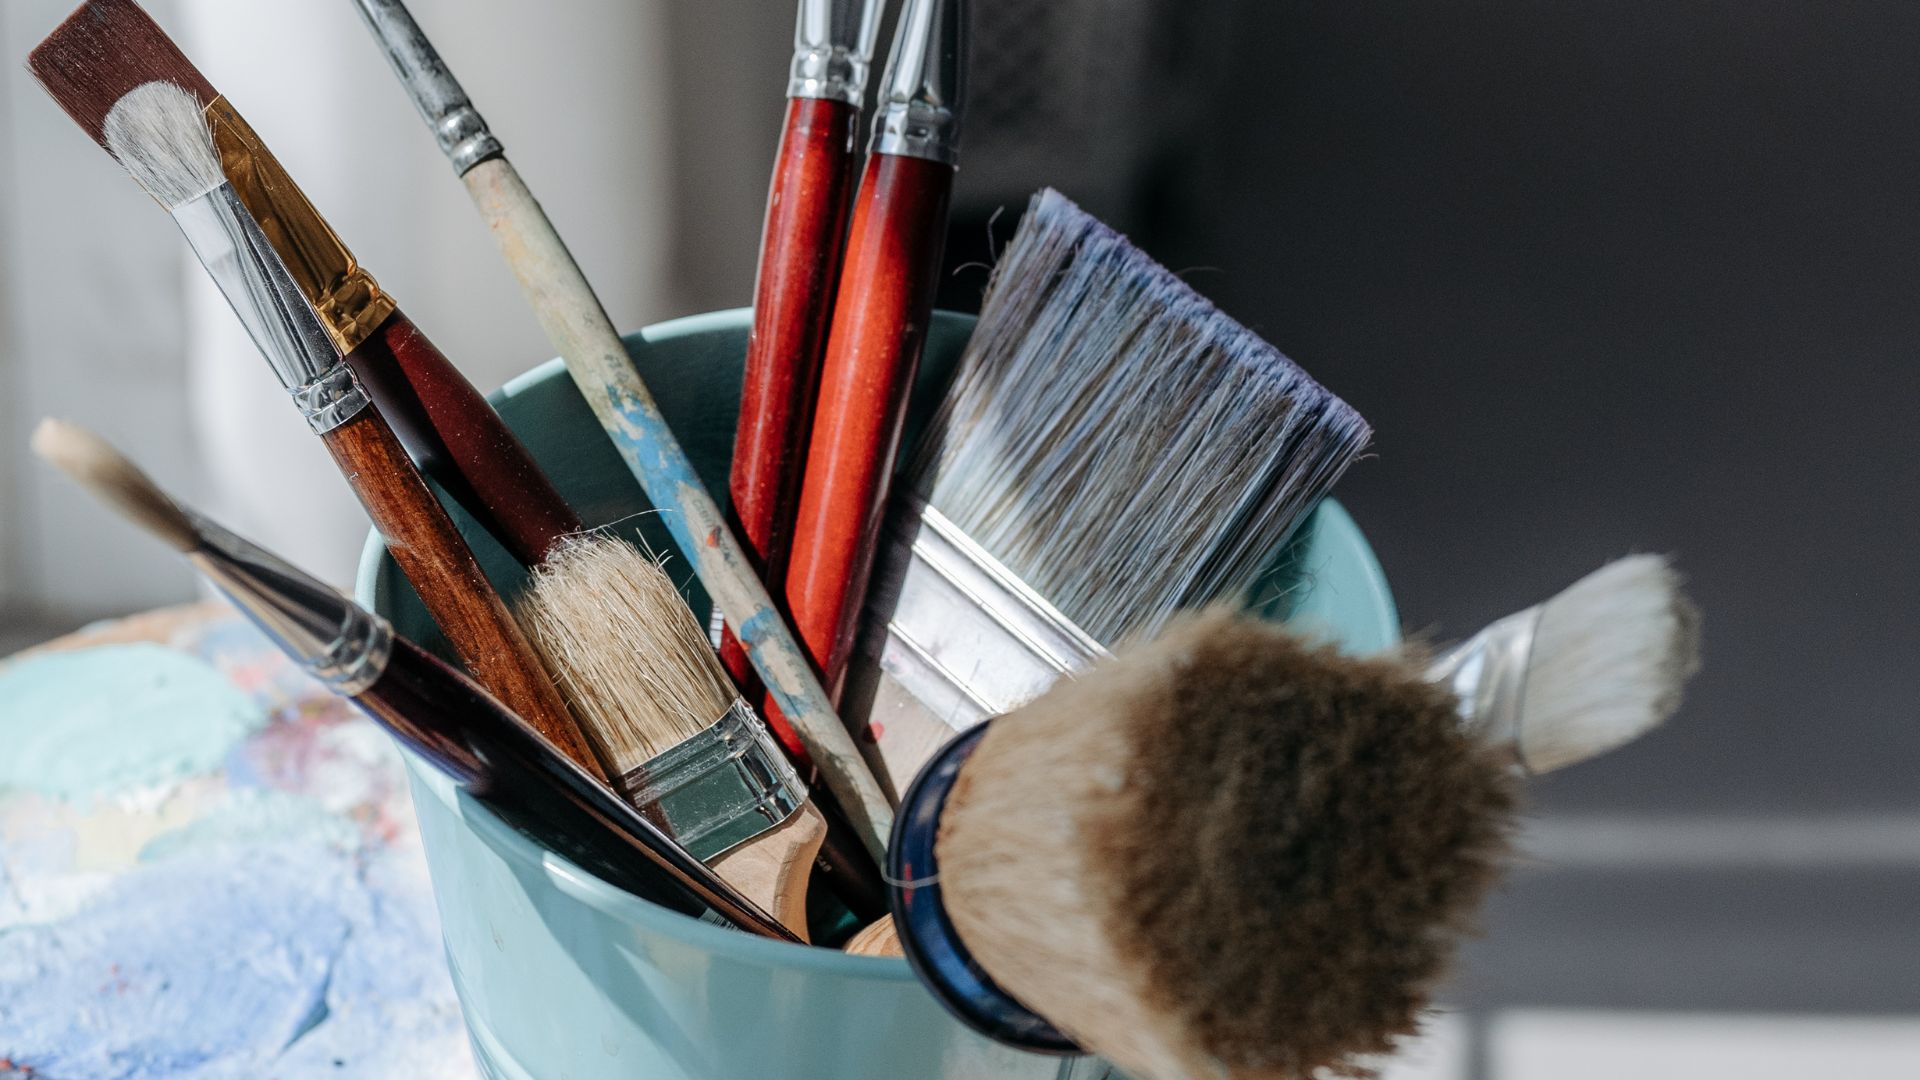 Paint Brushes in a Bucket